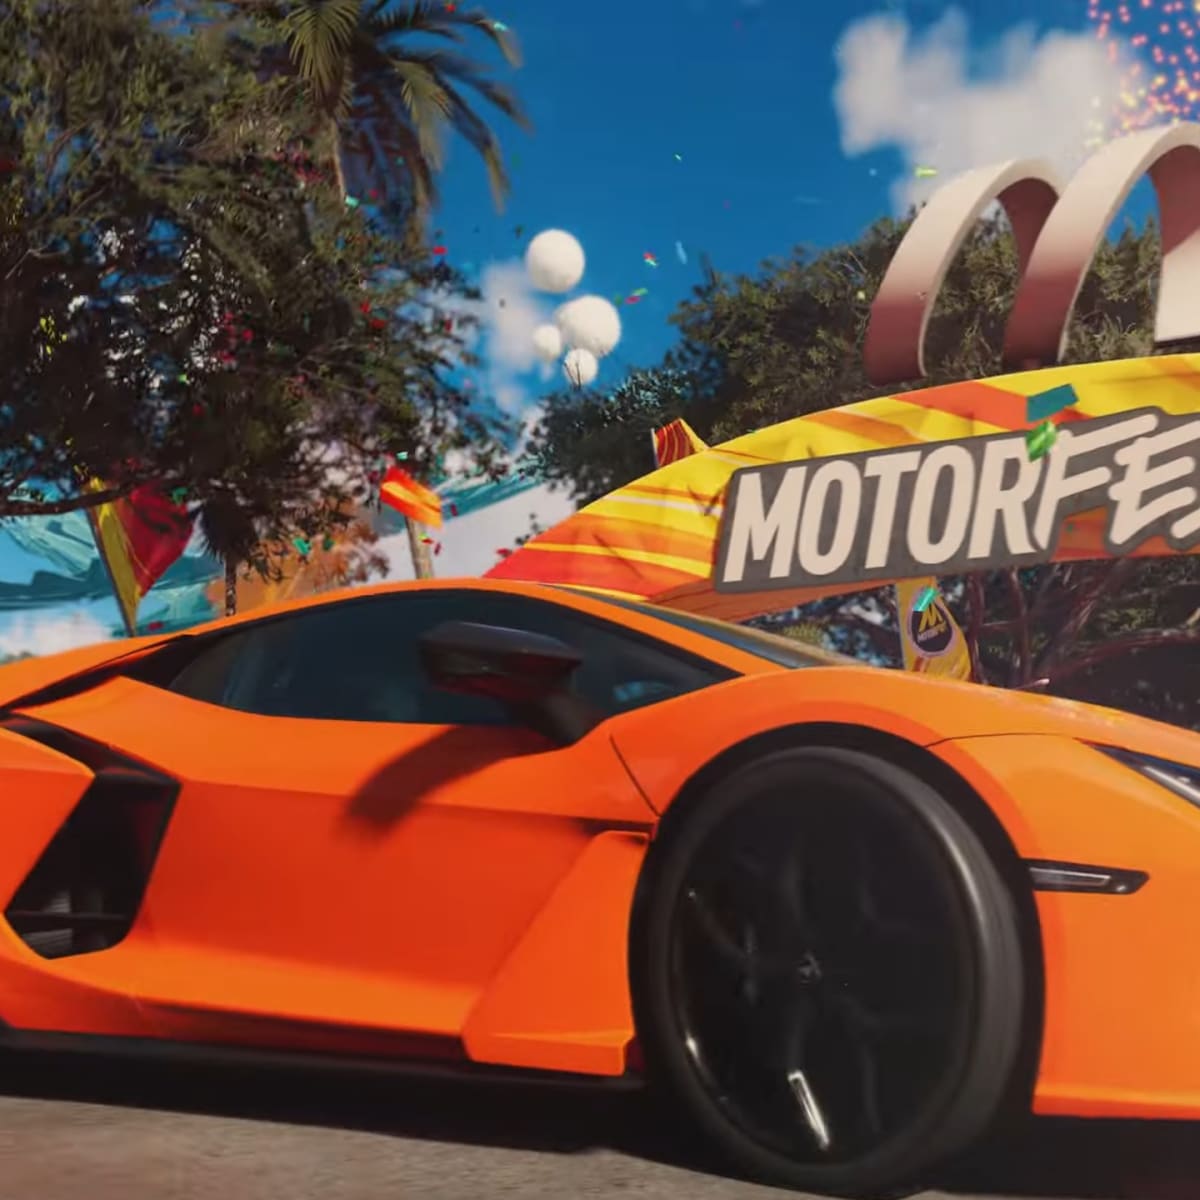 The Crew Motorfest video game review - Drive